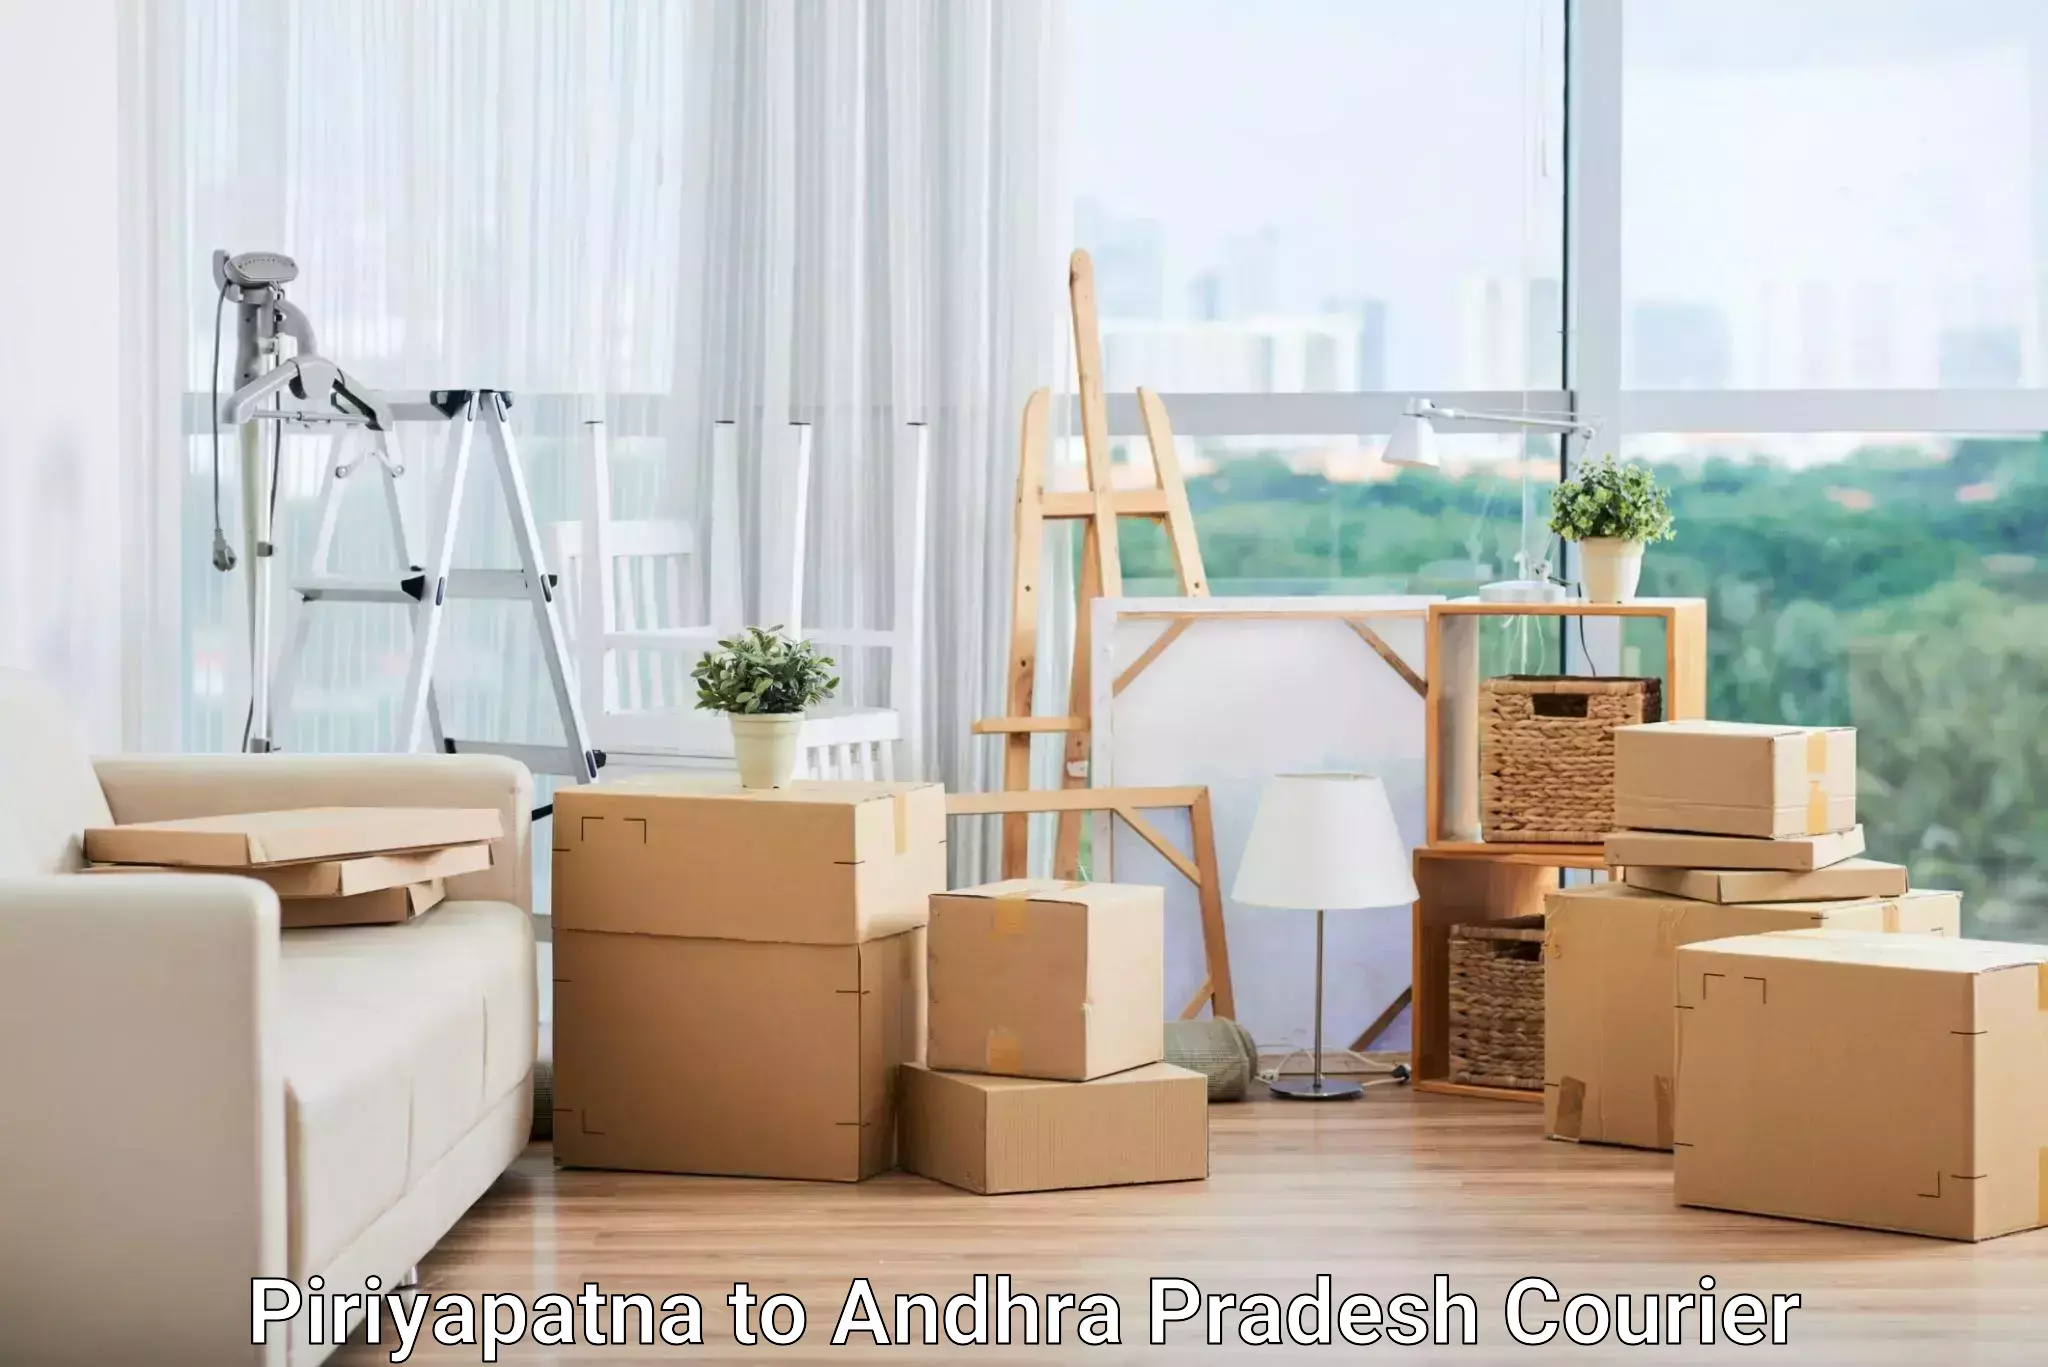 Personalized courier experiences Piriyapatna to Ongole